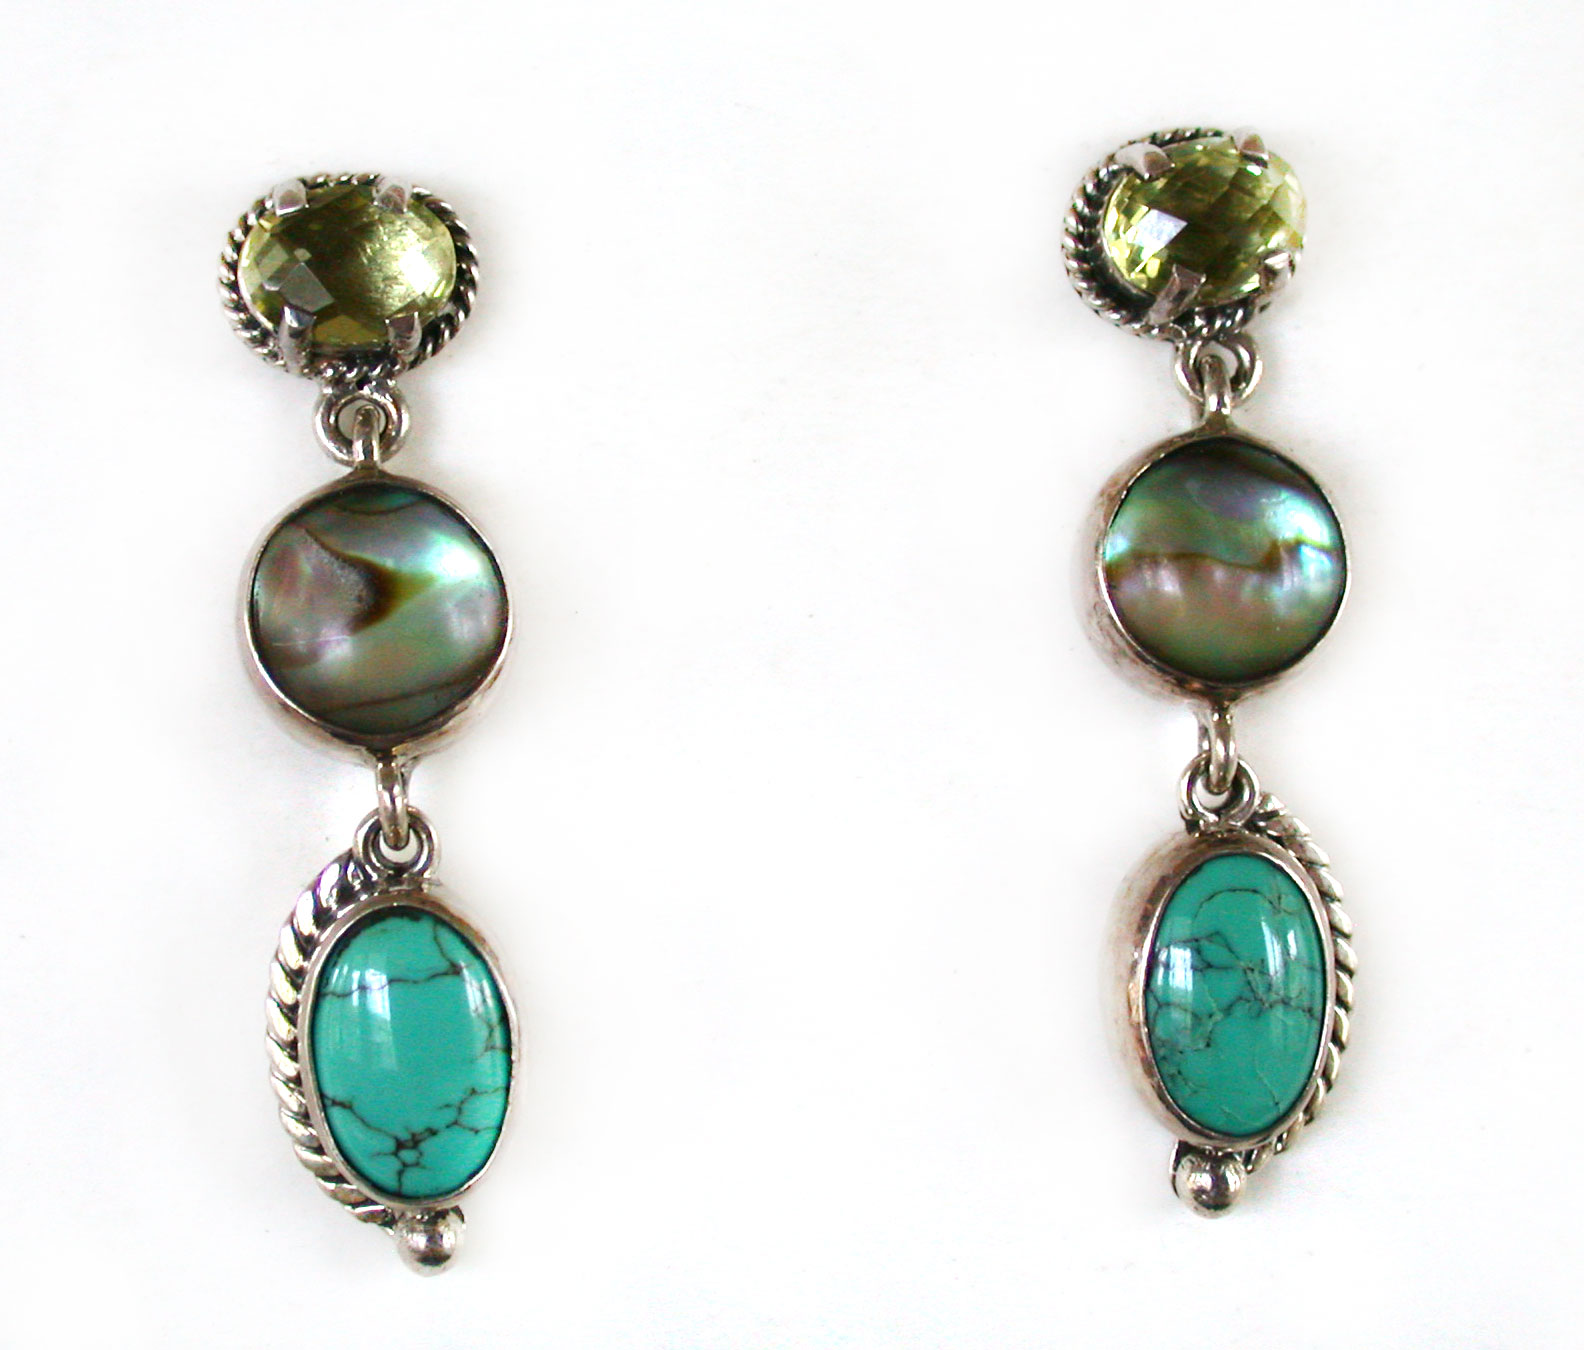 Amy Kahn Russell Online Trunk Show: Lemon Quartz, Abalone and Turquoise Post Earrings | Rendezvous Gallery